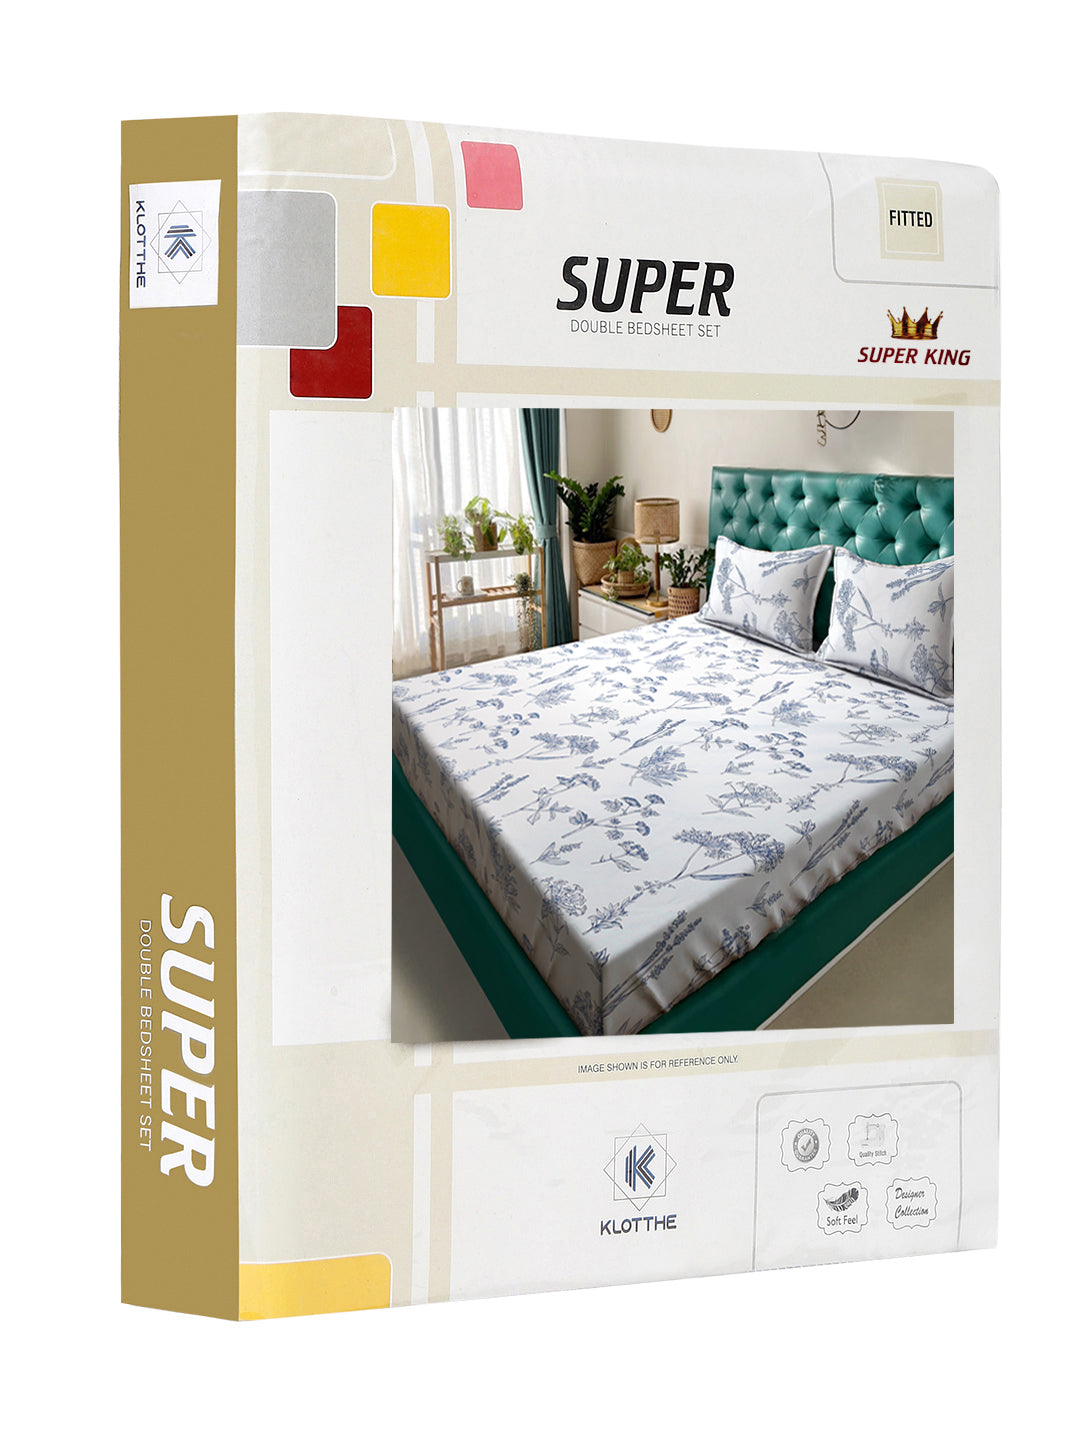 Klotthe OffWhite Floral 300 TC Cotton Blend Fitted Super King Double Bedsheet in Book Fold Packing